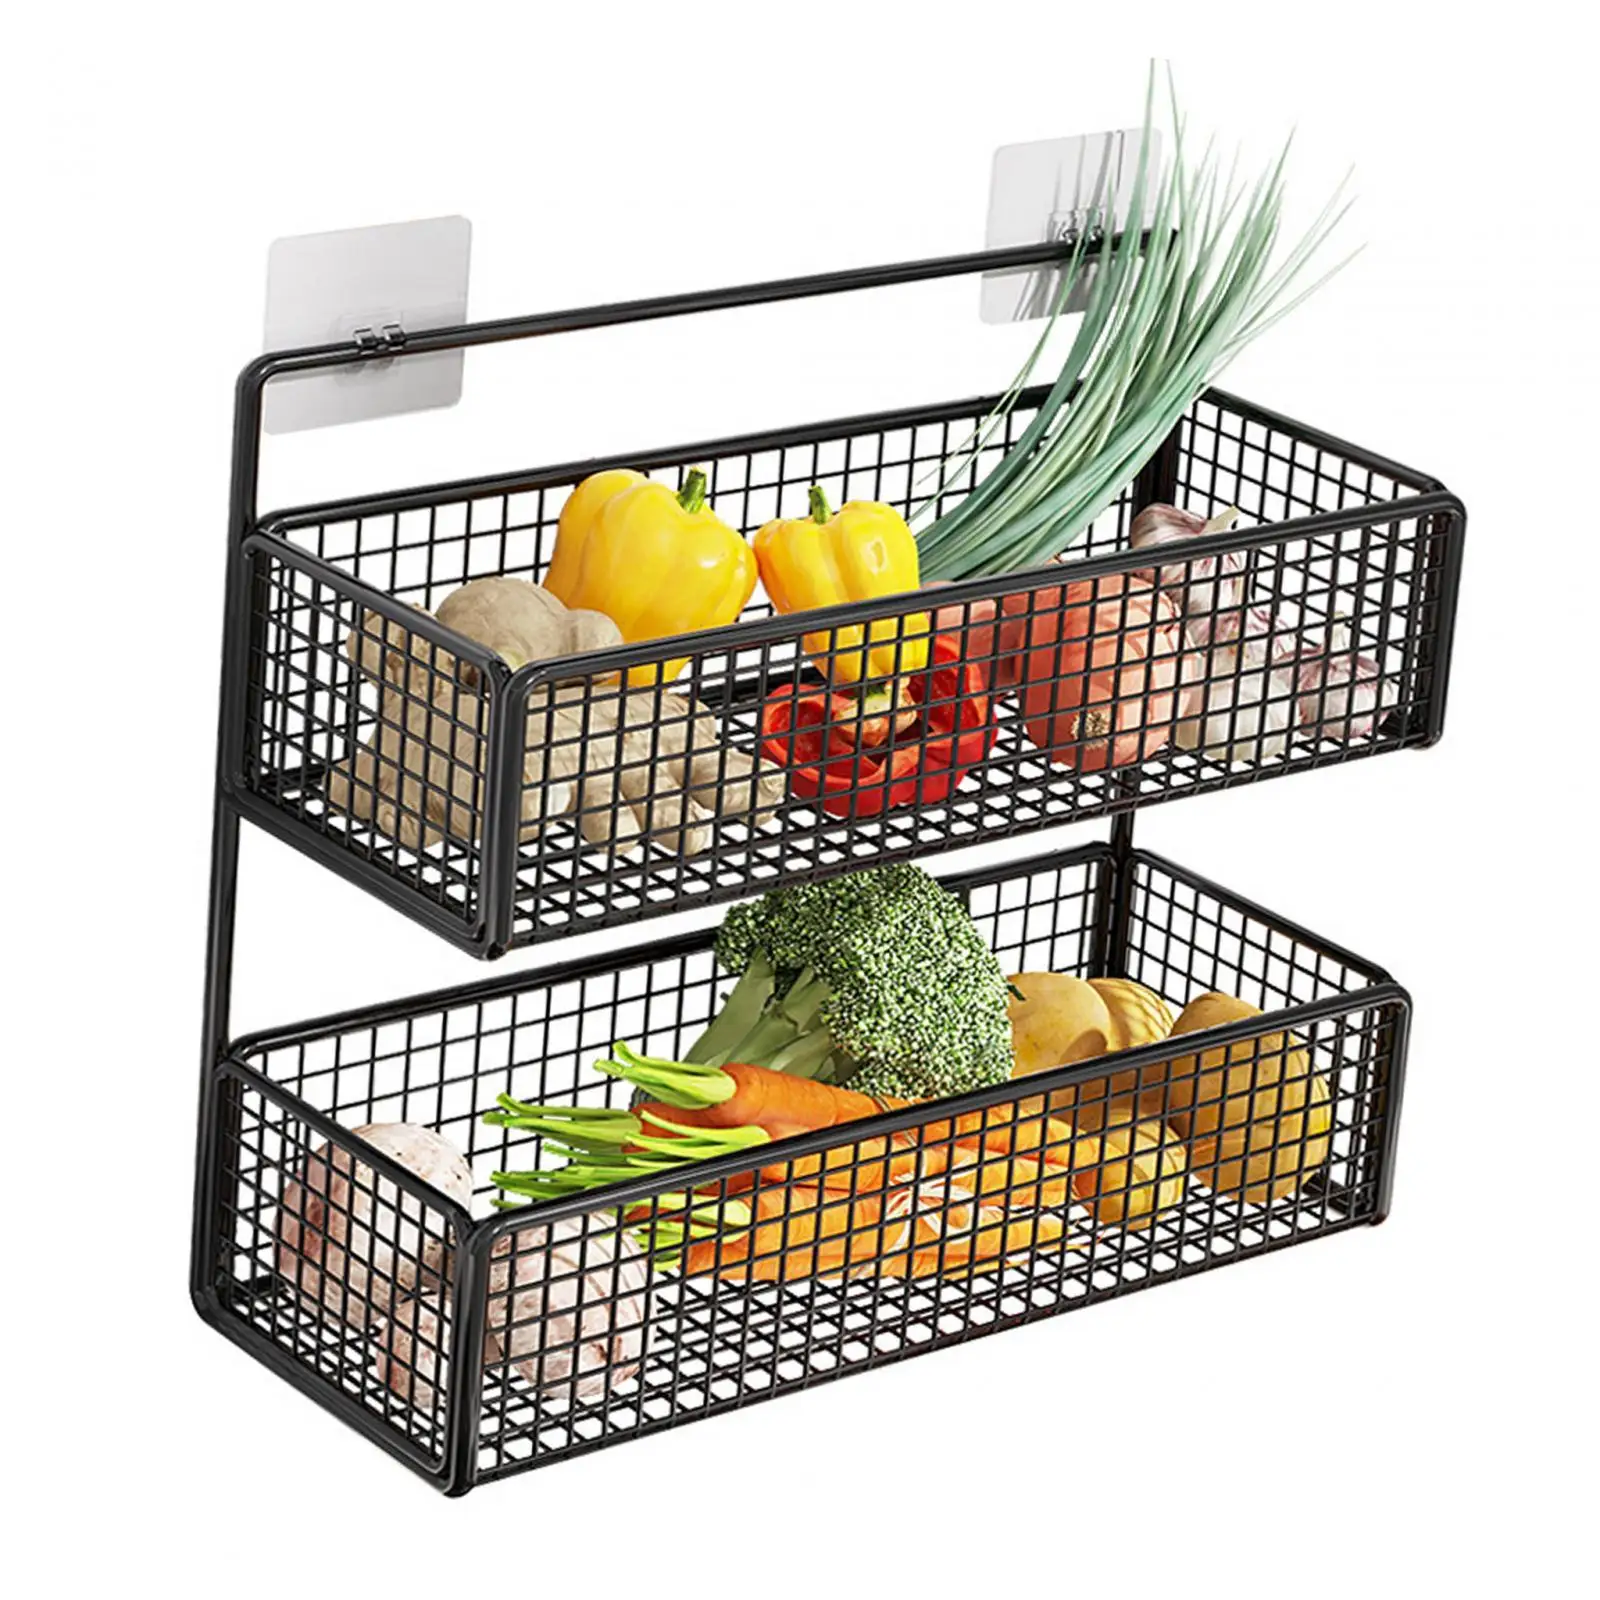 Spice Rack Organizer Wall Mounted Black Hanging Wall Organizer for Bathroom Fruits Vegetables Snacks Kitchen Home Crafts Room